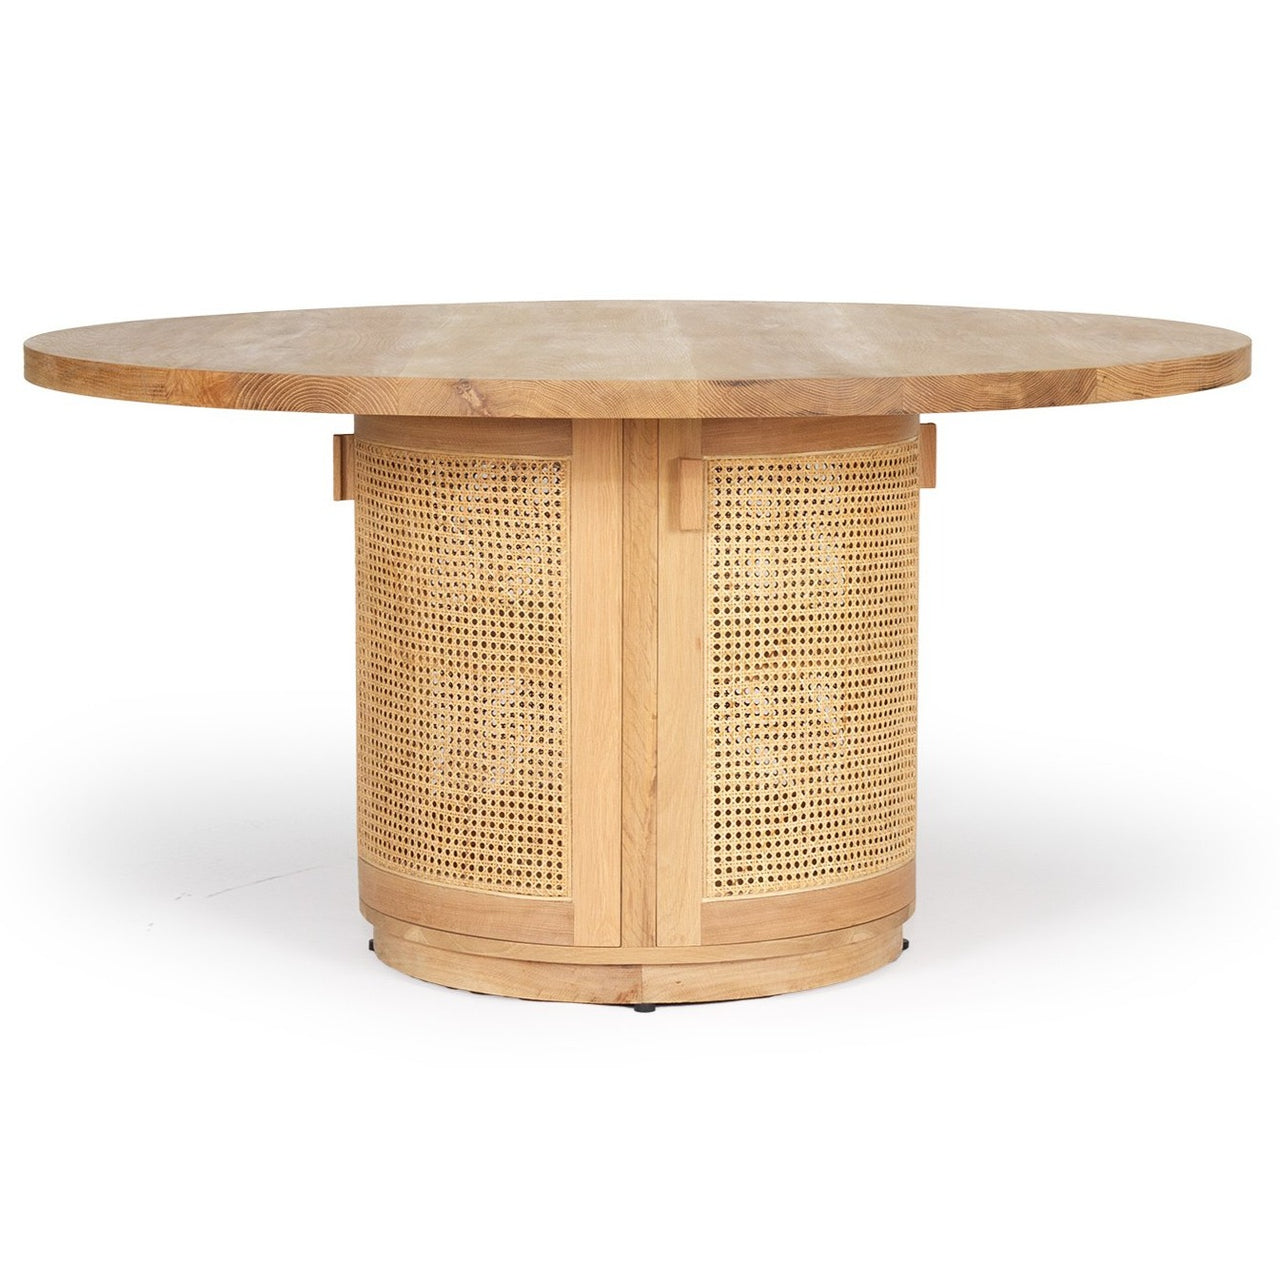 Hunter Round Dining Table